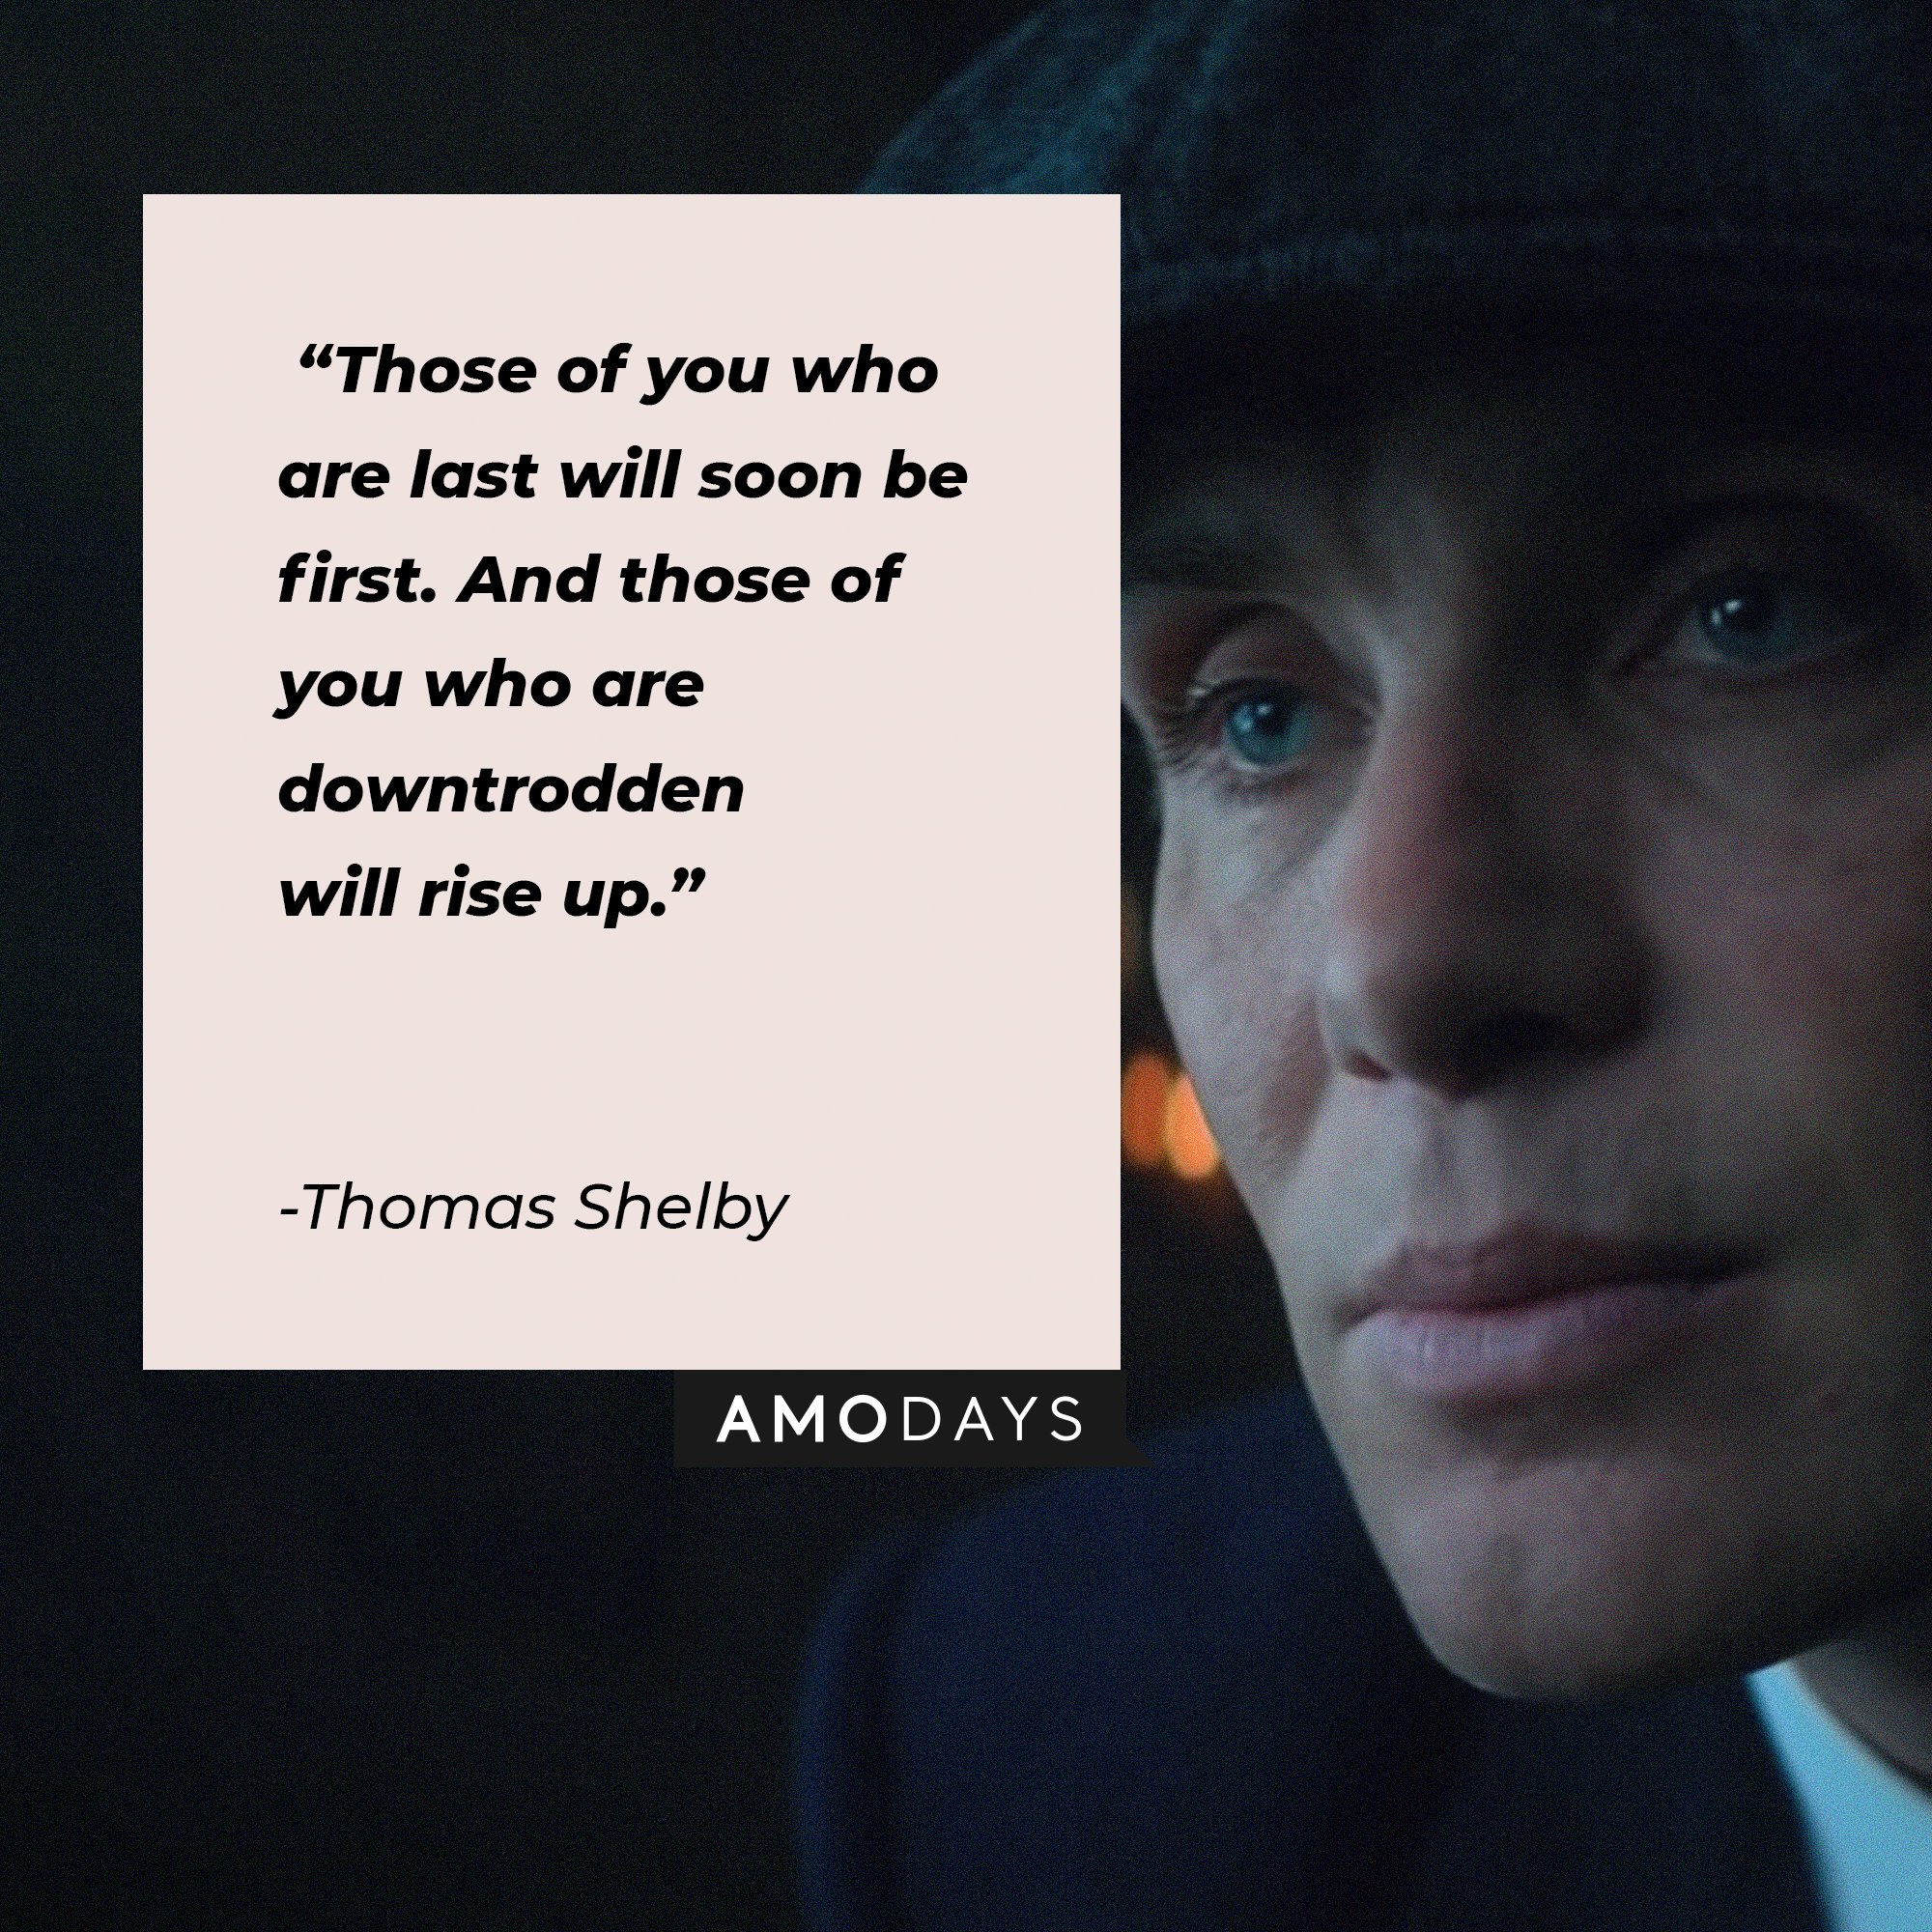 Thomas Shelby's quote:  “Those of you who are last will soon be first. And those of you who are downtrodden will rise up.” | Image: AmoDays